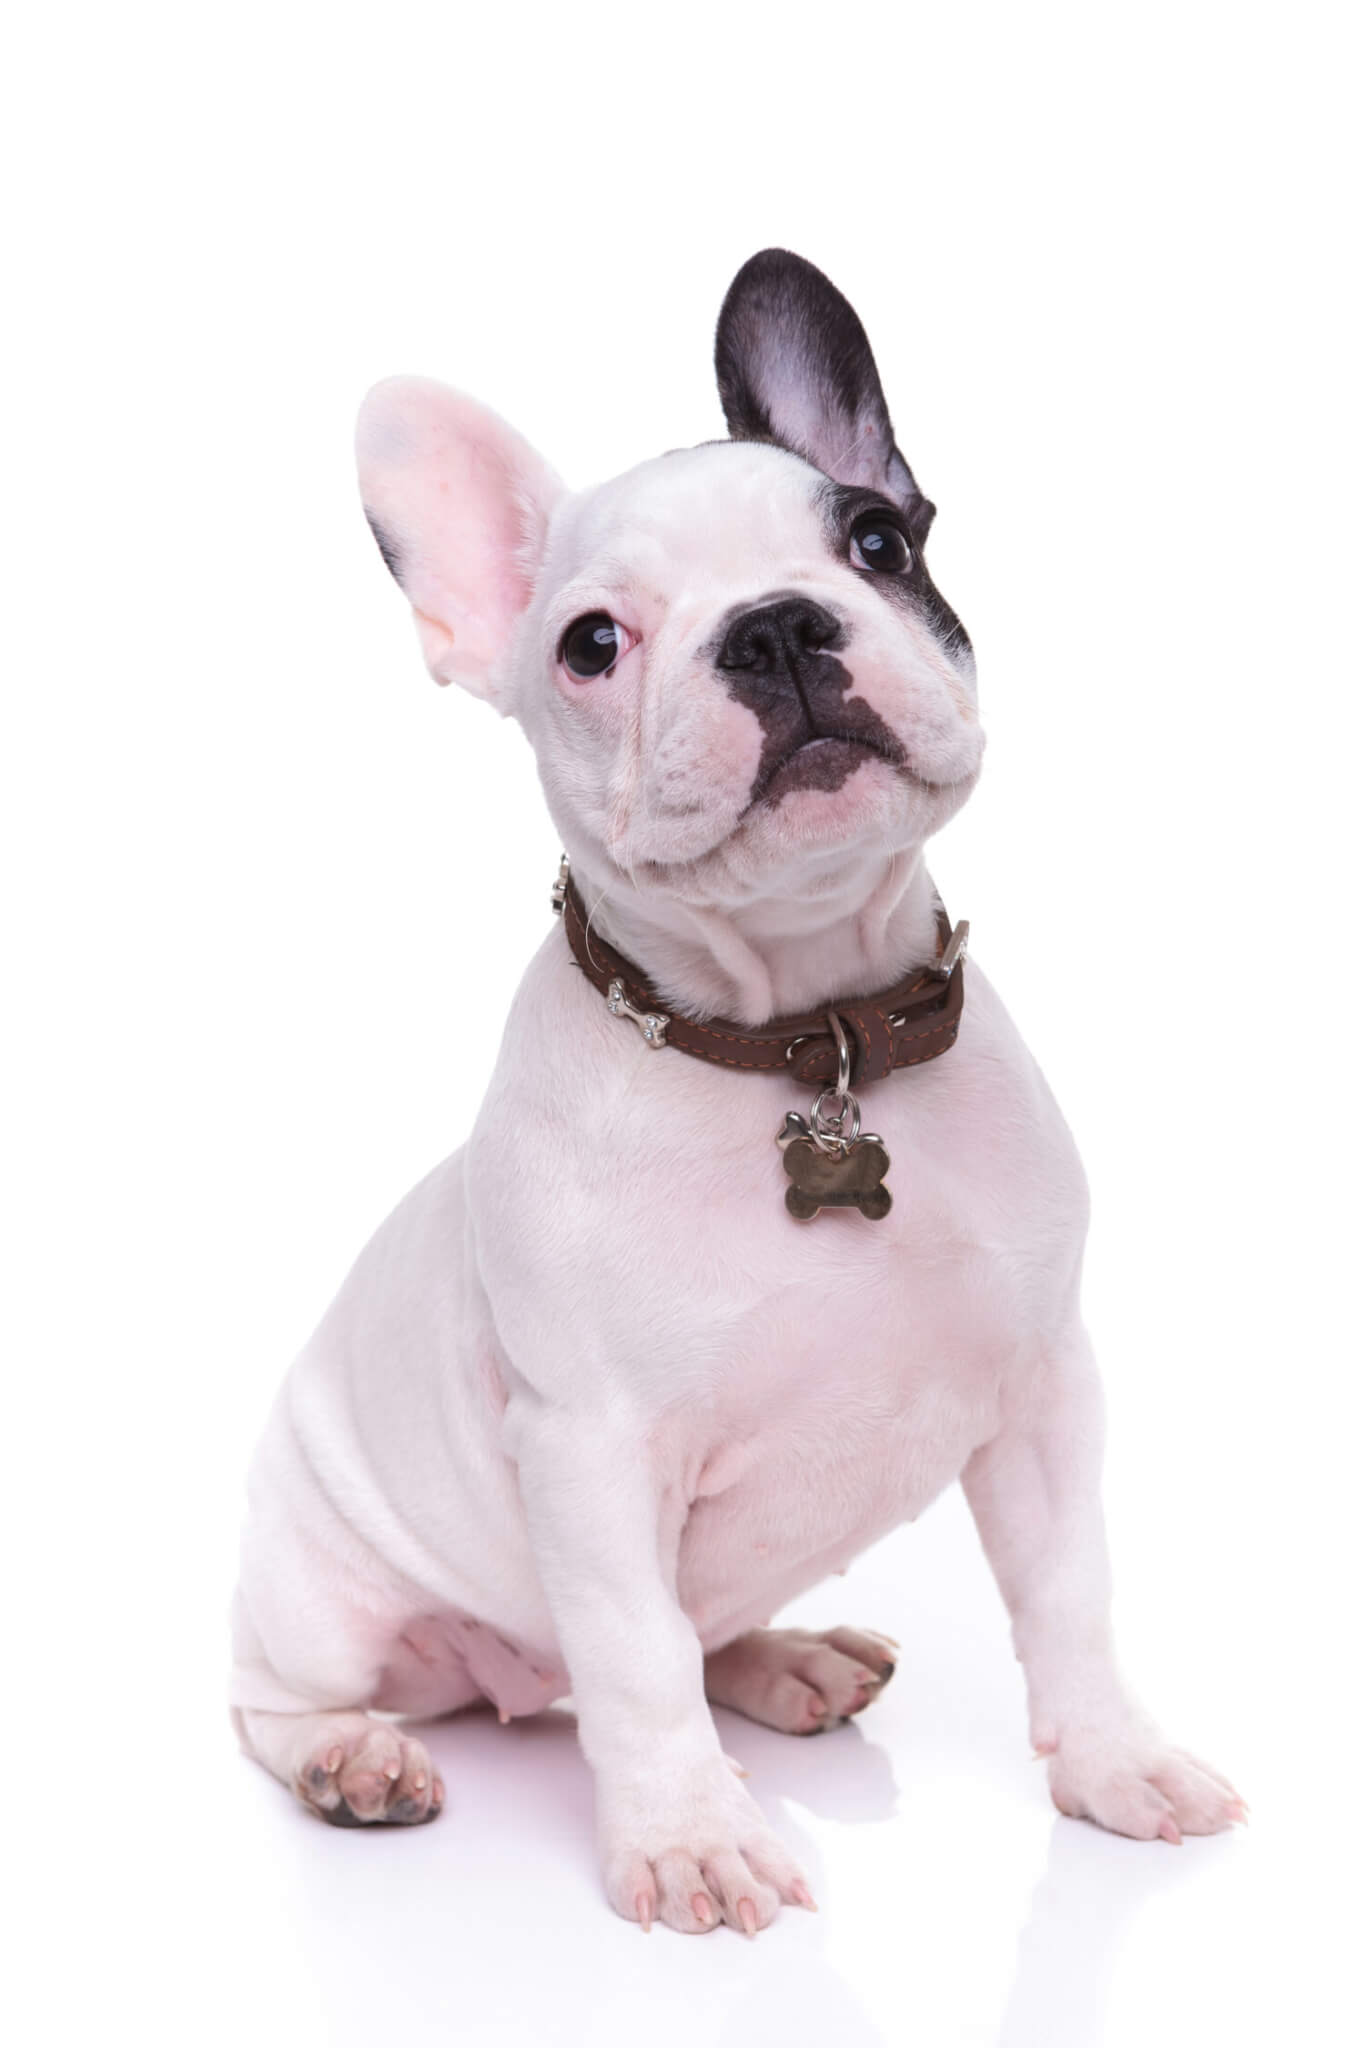 cute french bulldor puppy dog is sitting on white background in studio and looks at the camera